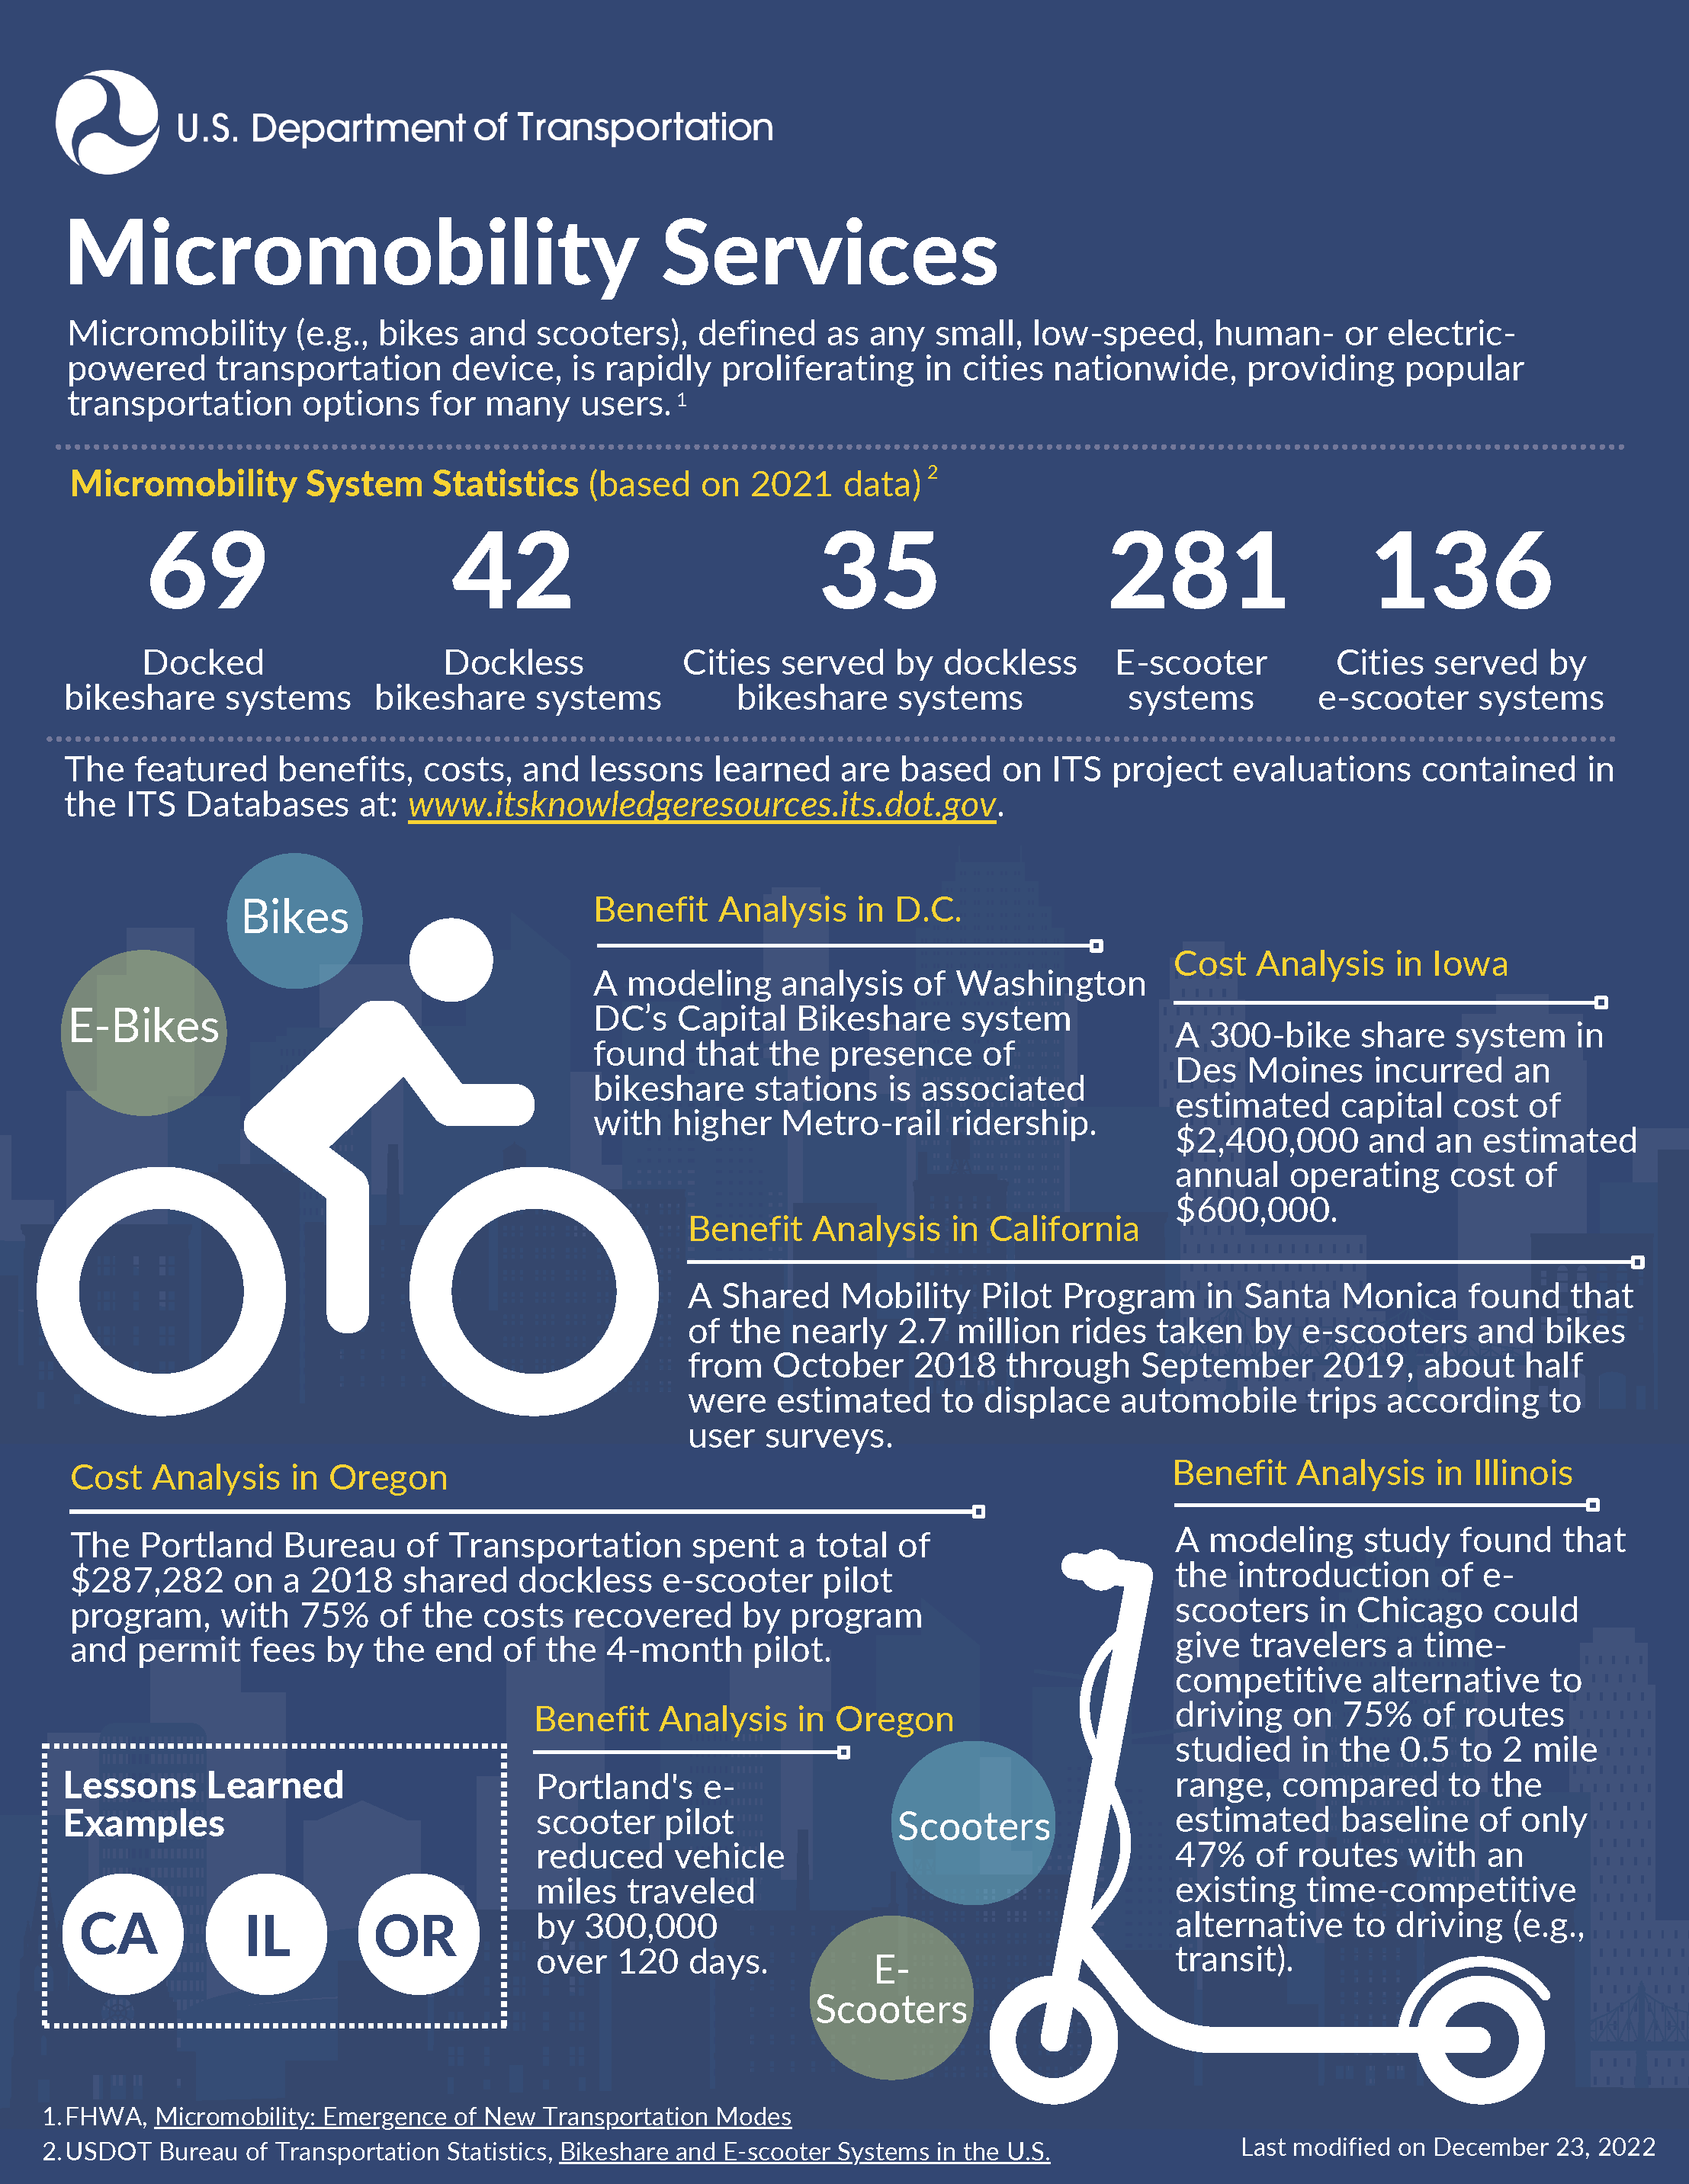 Infographic depicting examples of micromobility services, including deployments in DC, Des Moines, Santa Monica, Portland, and Chicago.